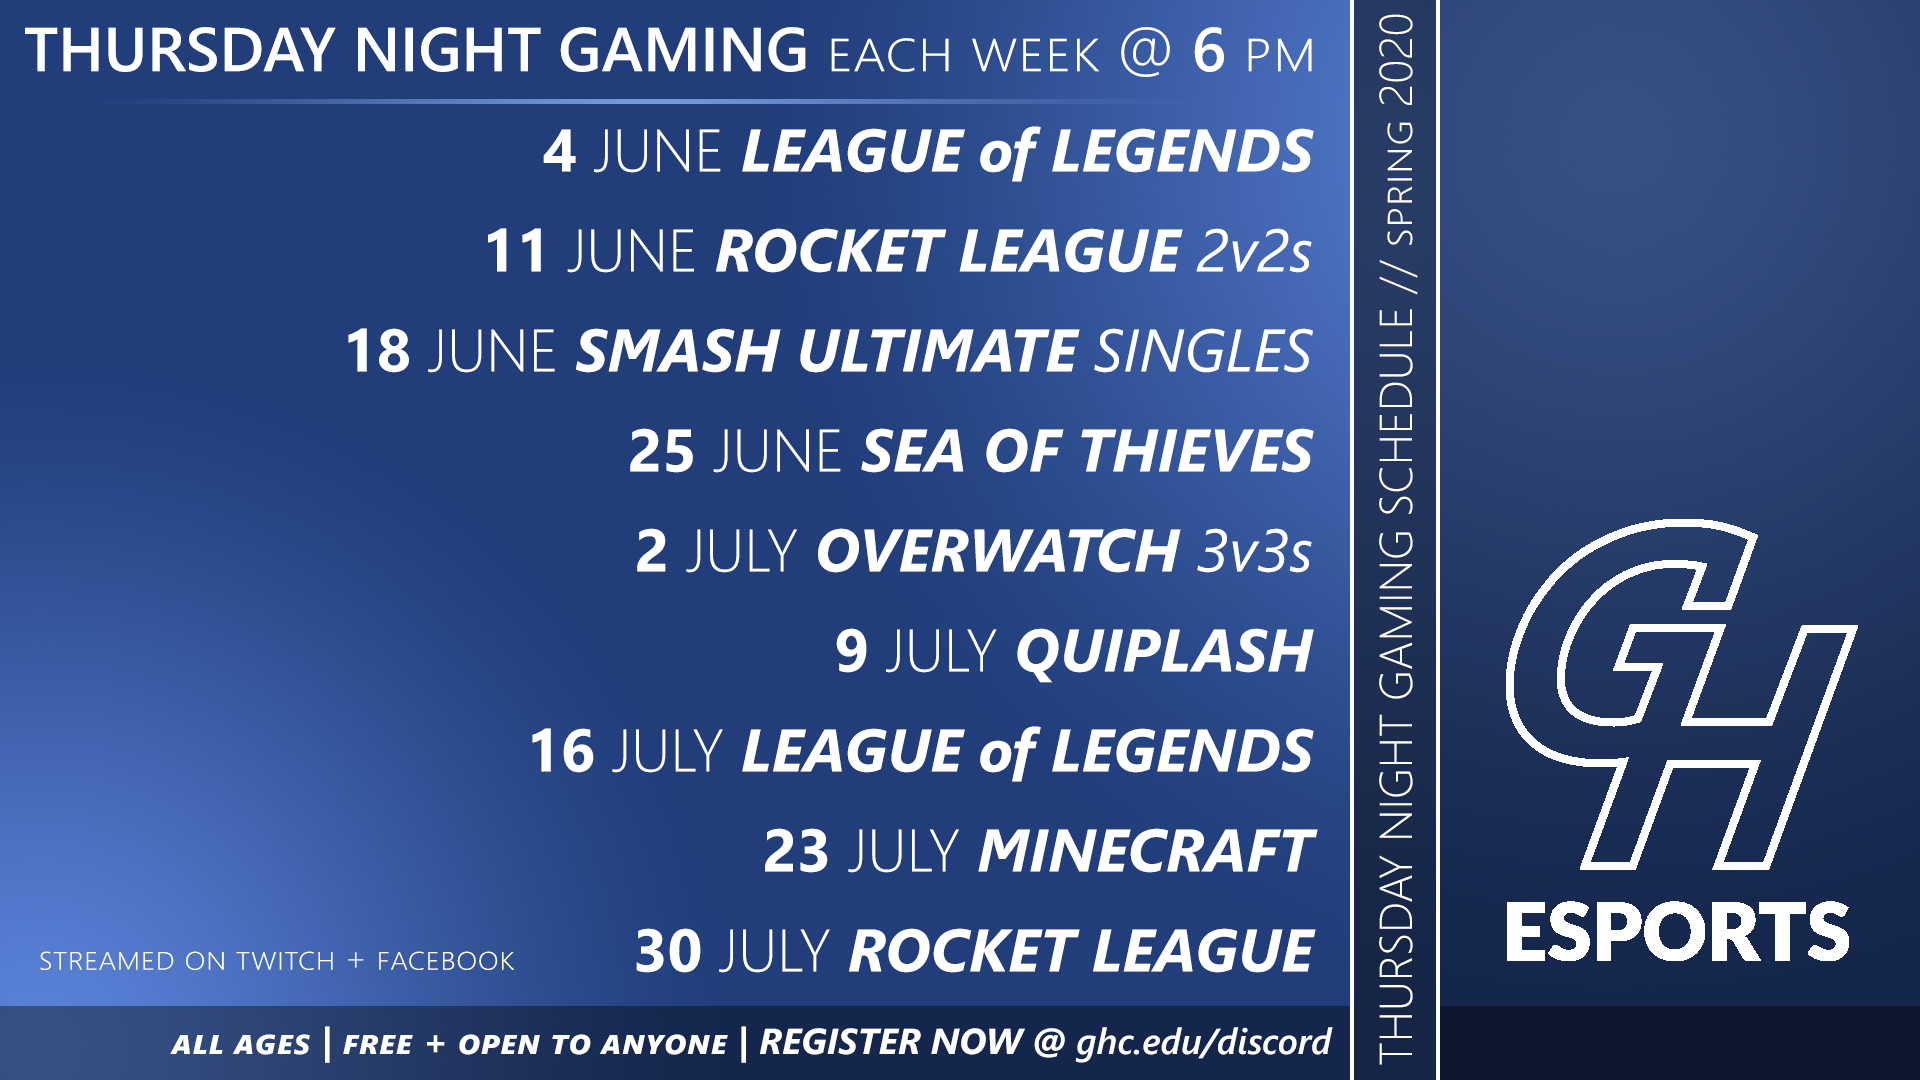 Thursday Night Gaming Schedule